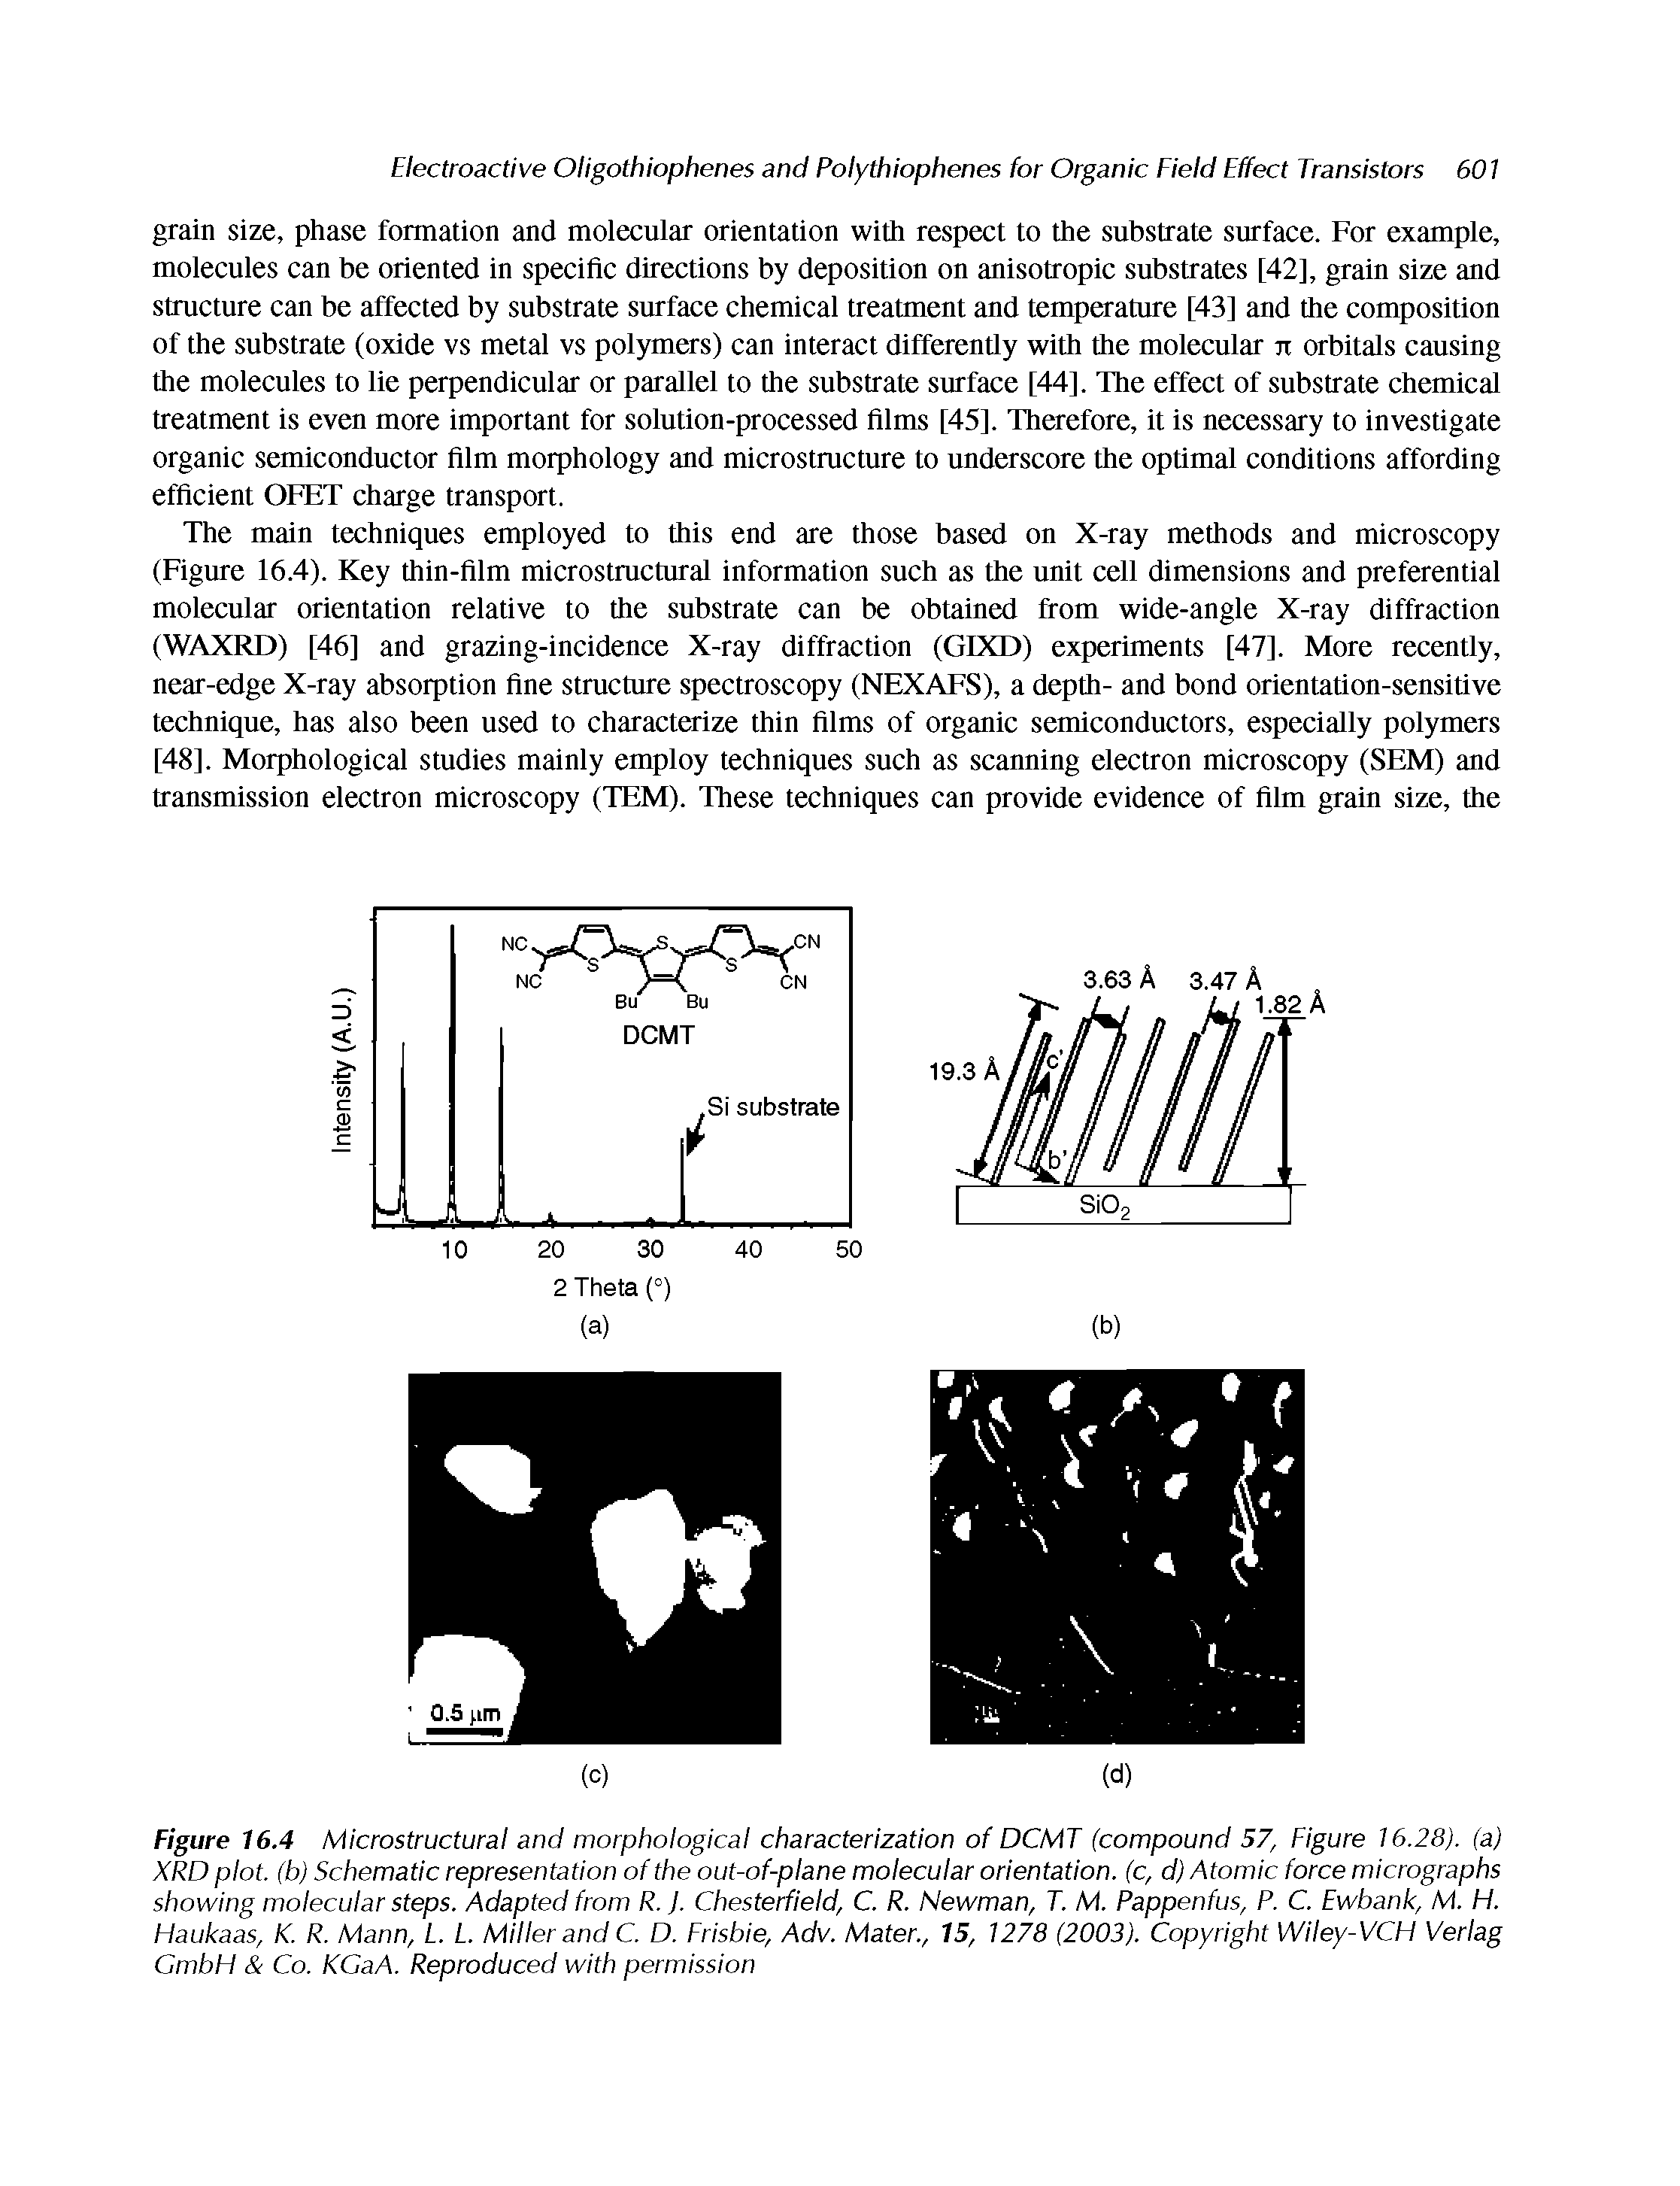 Figure 16.4 Microstructural and morphological characterization of DCMT (compound 57, Figure 16.28). (a) XRD plot, (b) Schematic representation of the out-of-plane molecular orientation, (c, d) Atomic force micrographs showing molecular steps. Adapted from R. J. Chesterfield, C. R. Newman, T. M. Pappenfus, P. C. Ewbank, M. H. Haukaas, K. R. Mann, L. L Miller and C. D. Frisbie, Adv. Mater., 15, 1278 (2003). Copyright Wiley-VCH Verlag GmbH Co. KCaA. Reproduced with permission...